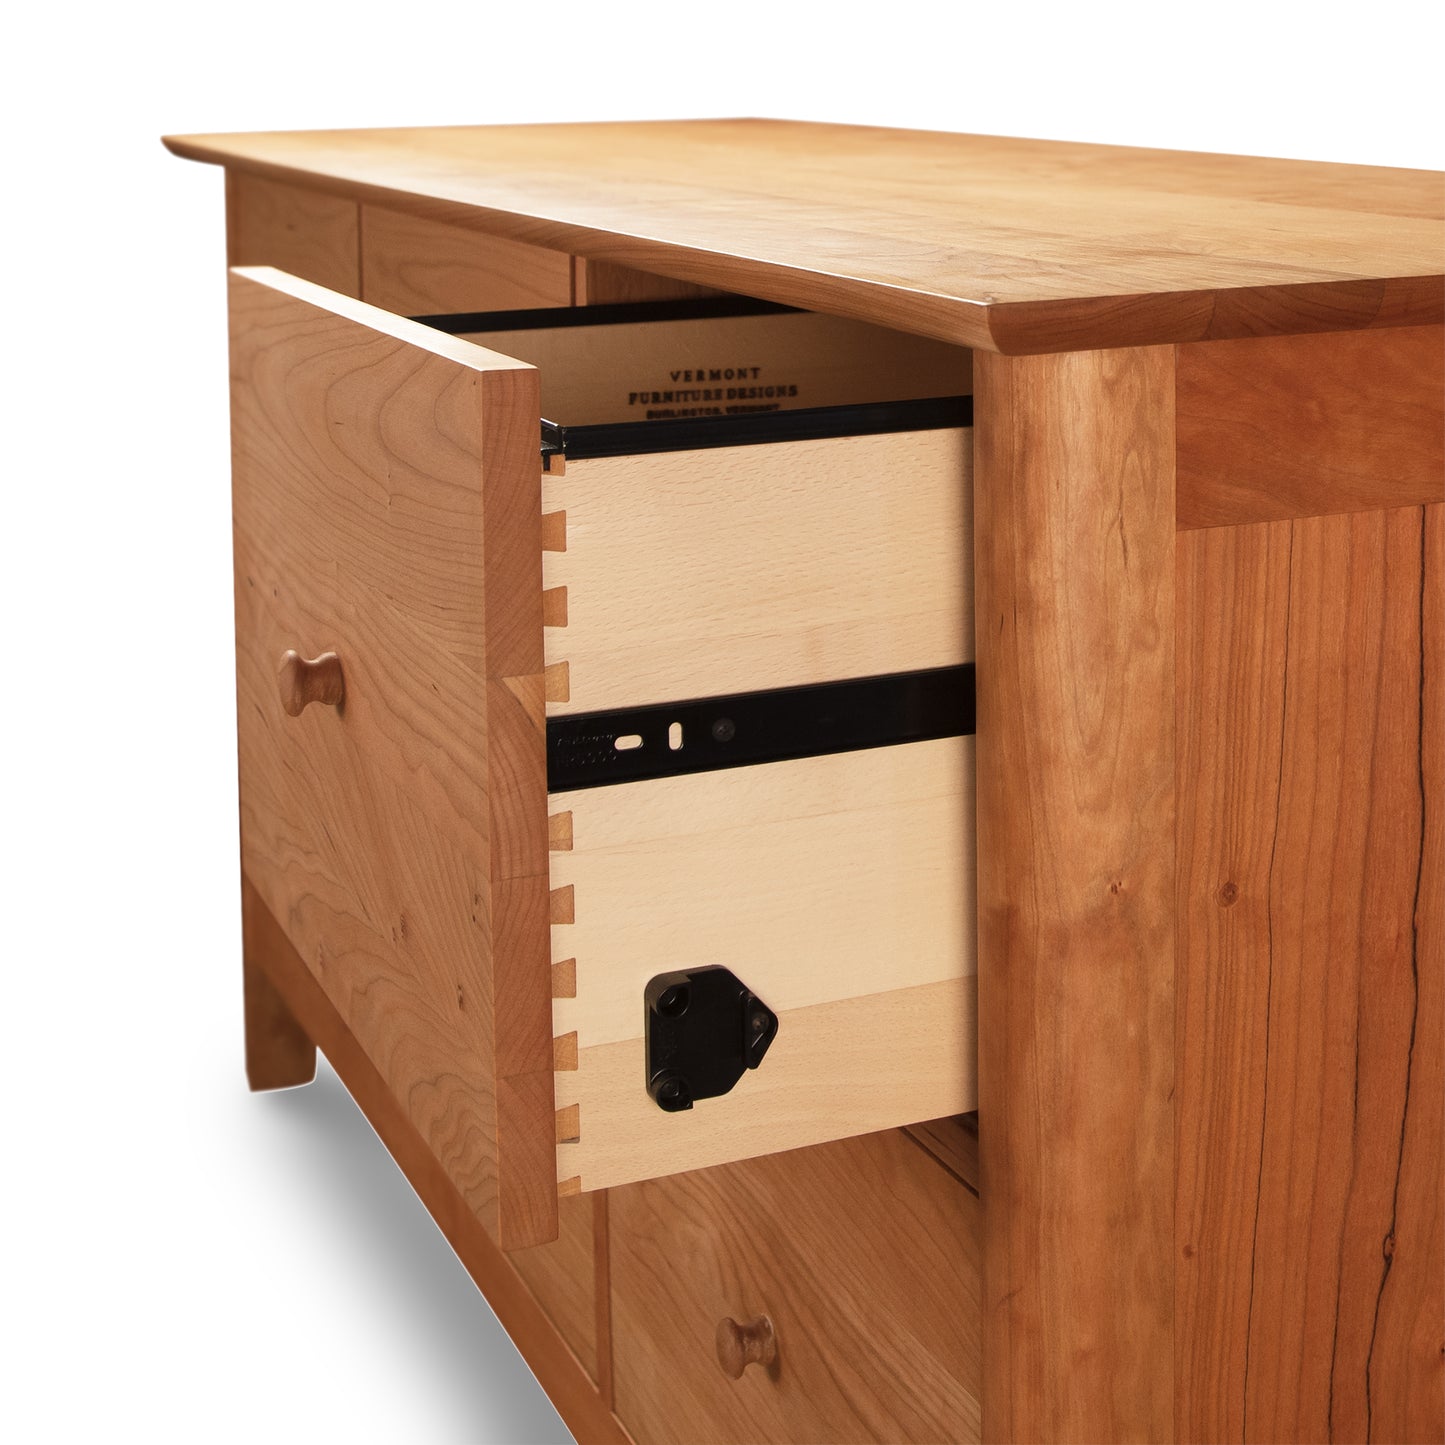 A Heartwood Shaker 6-Drawer Legal File Cabinet by Vermont Furniture Designs with an open drawer, revealing a black safe box mounted inside.